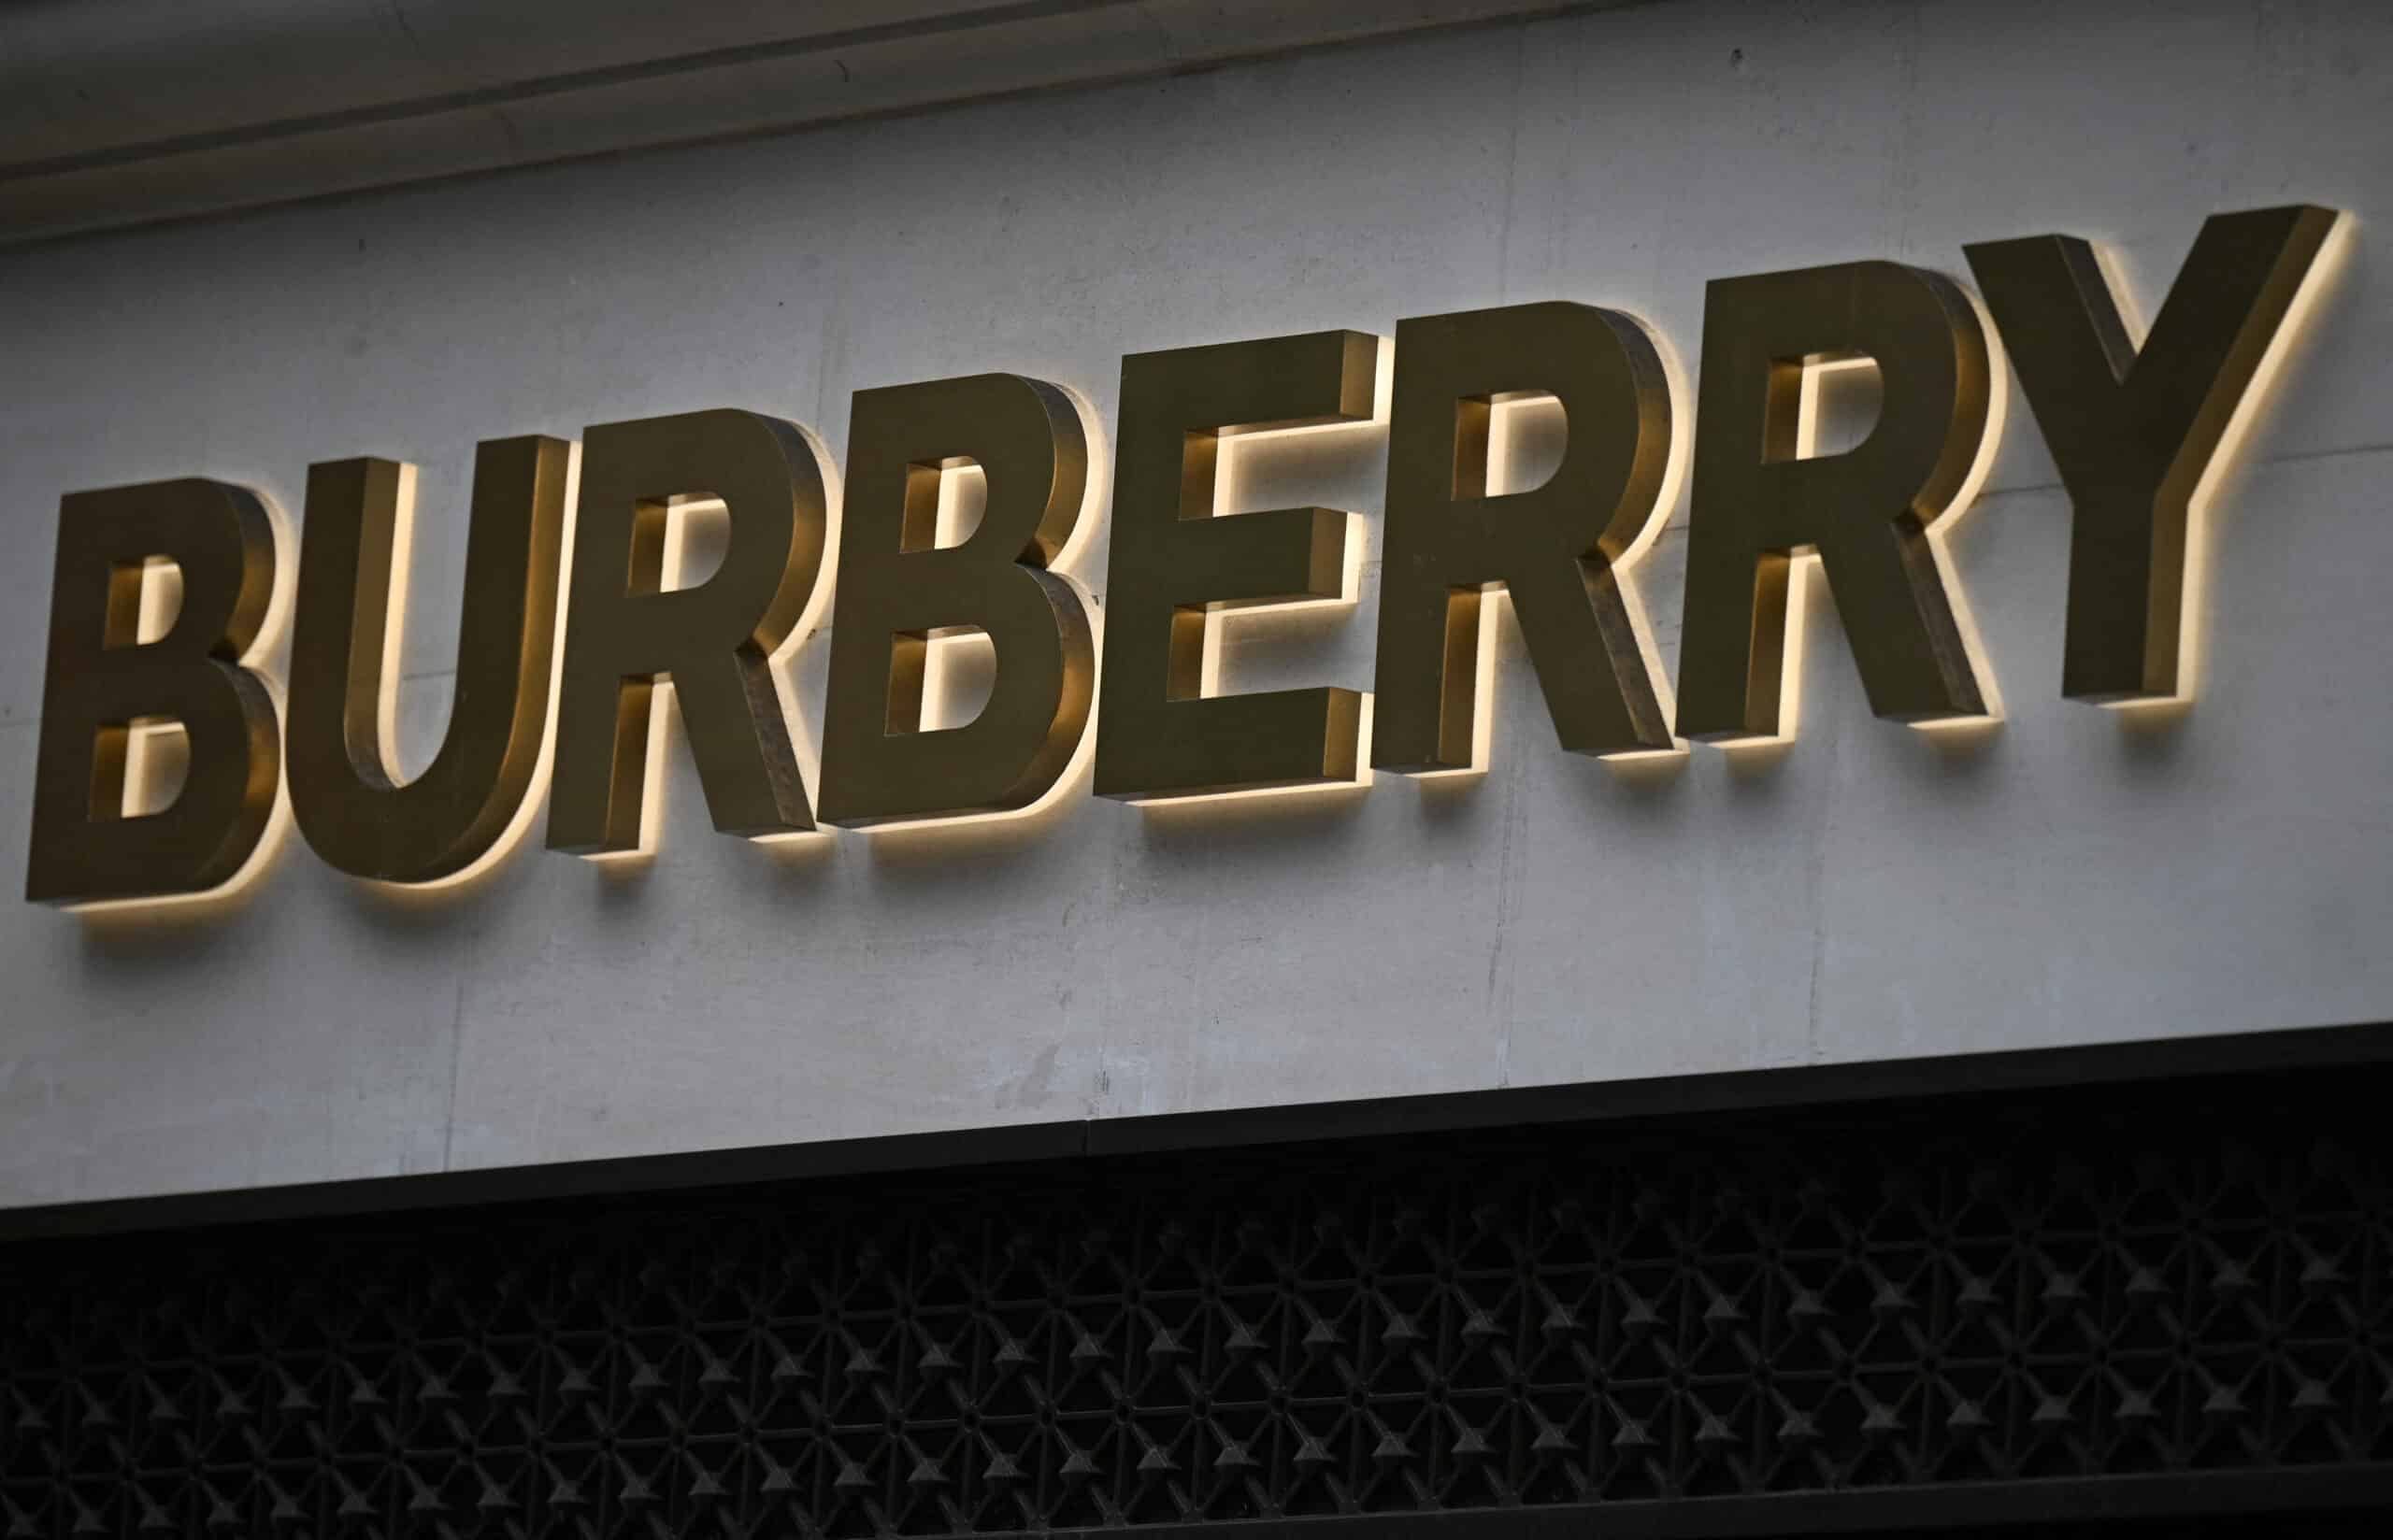 Burberry replaces CEO after ‘disappointing’ results